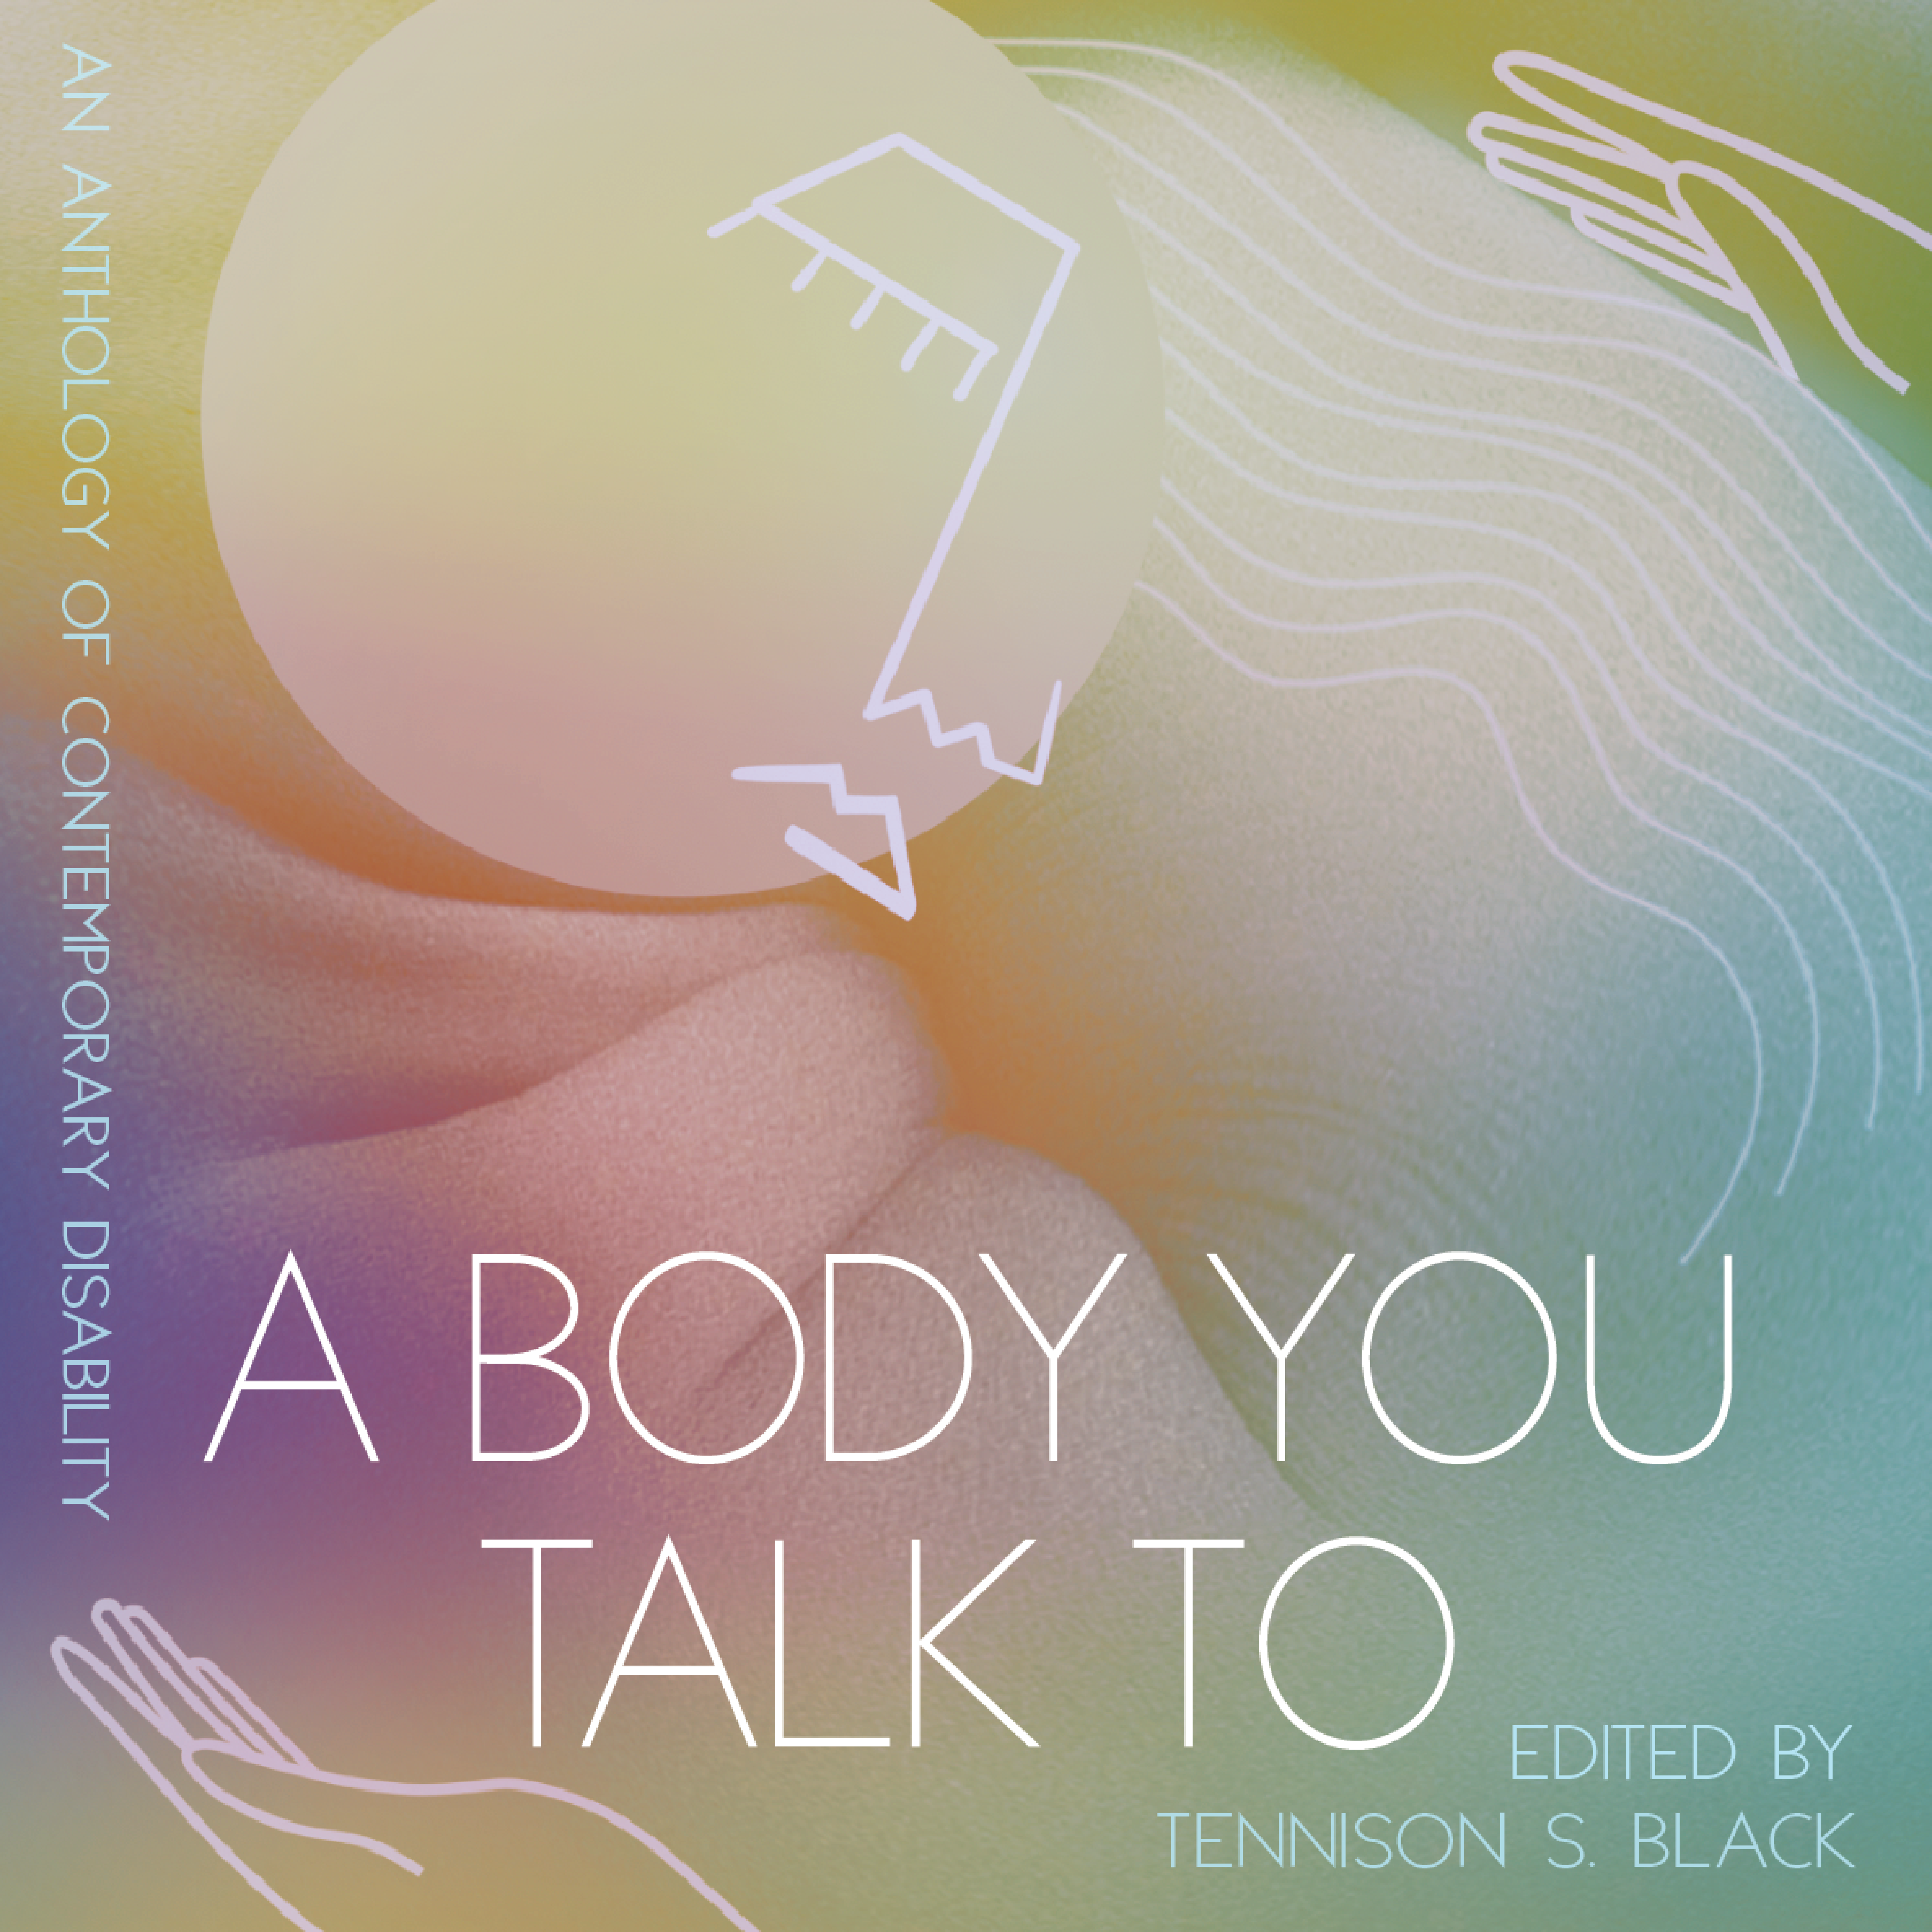 A square book cover with a host of soft pastel colors and an abstract face above the book title: A Body You Talk To